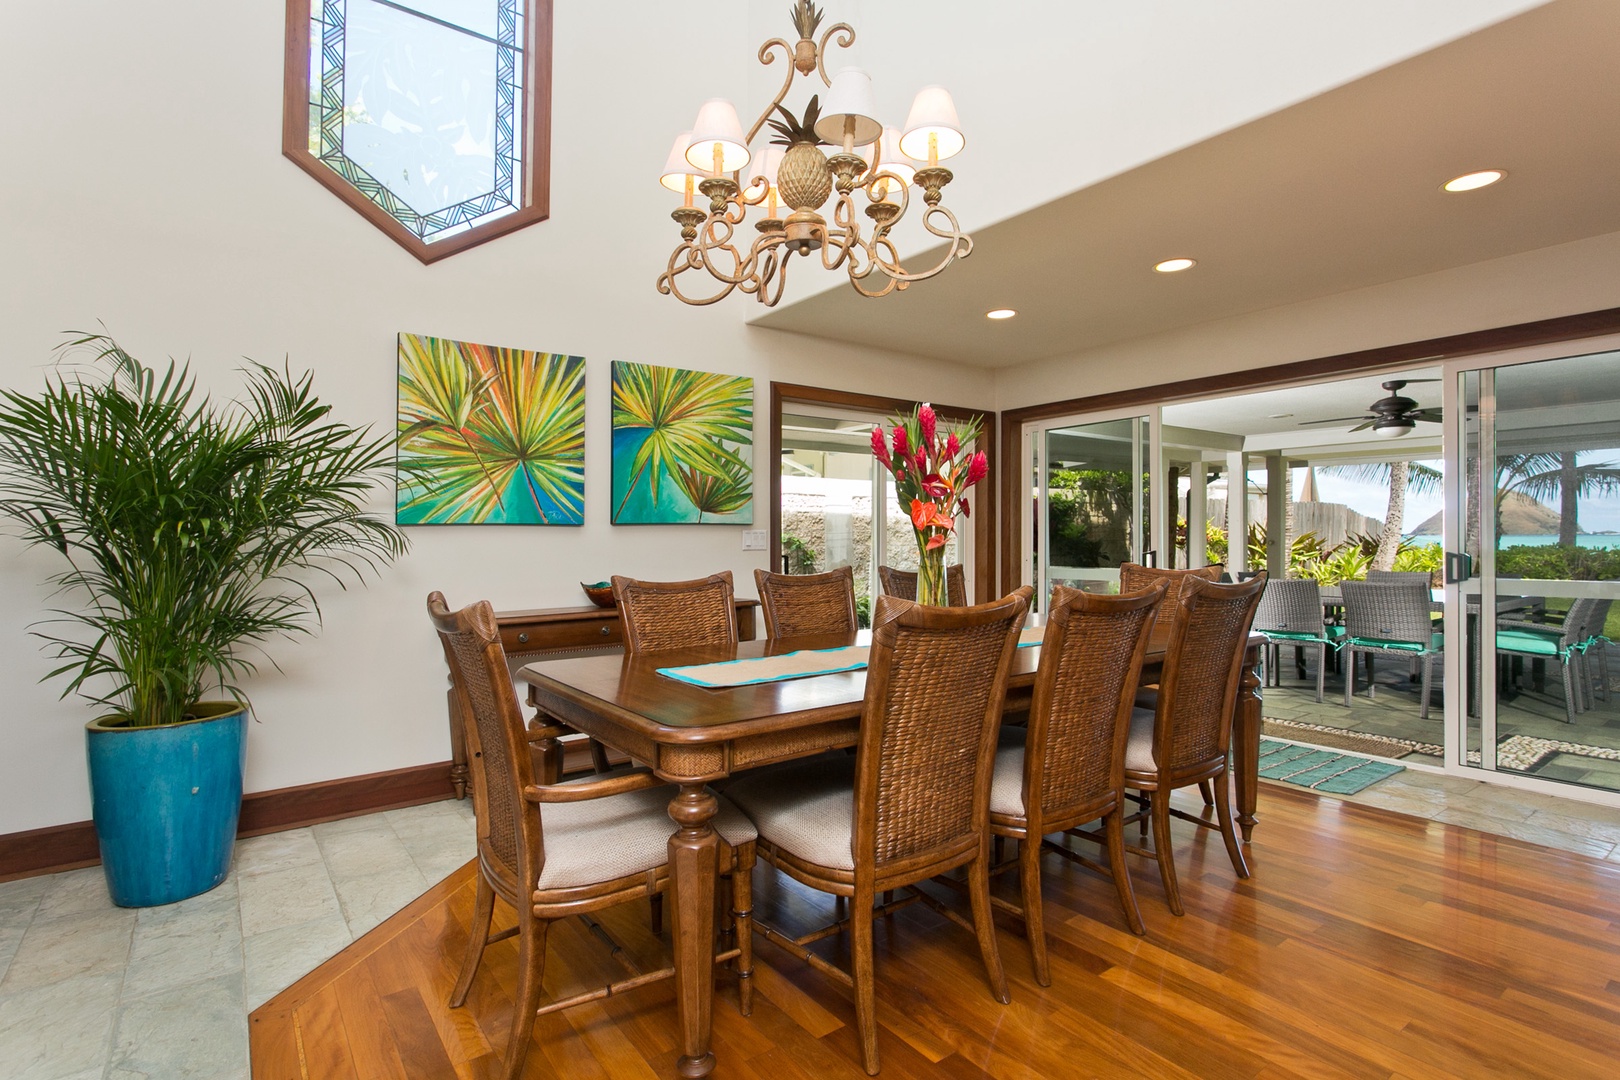 Kailua Vacation Rentals, Hale Melia* - Warm moments shared in this elegant dining table for eight.